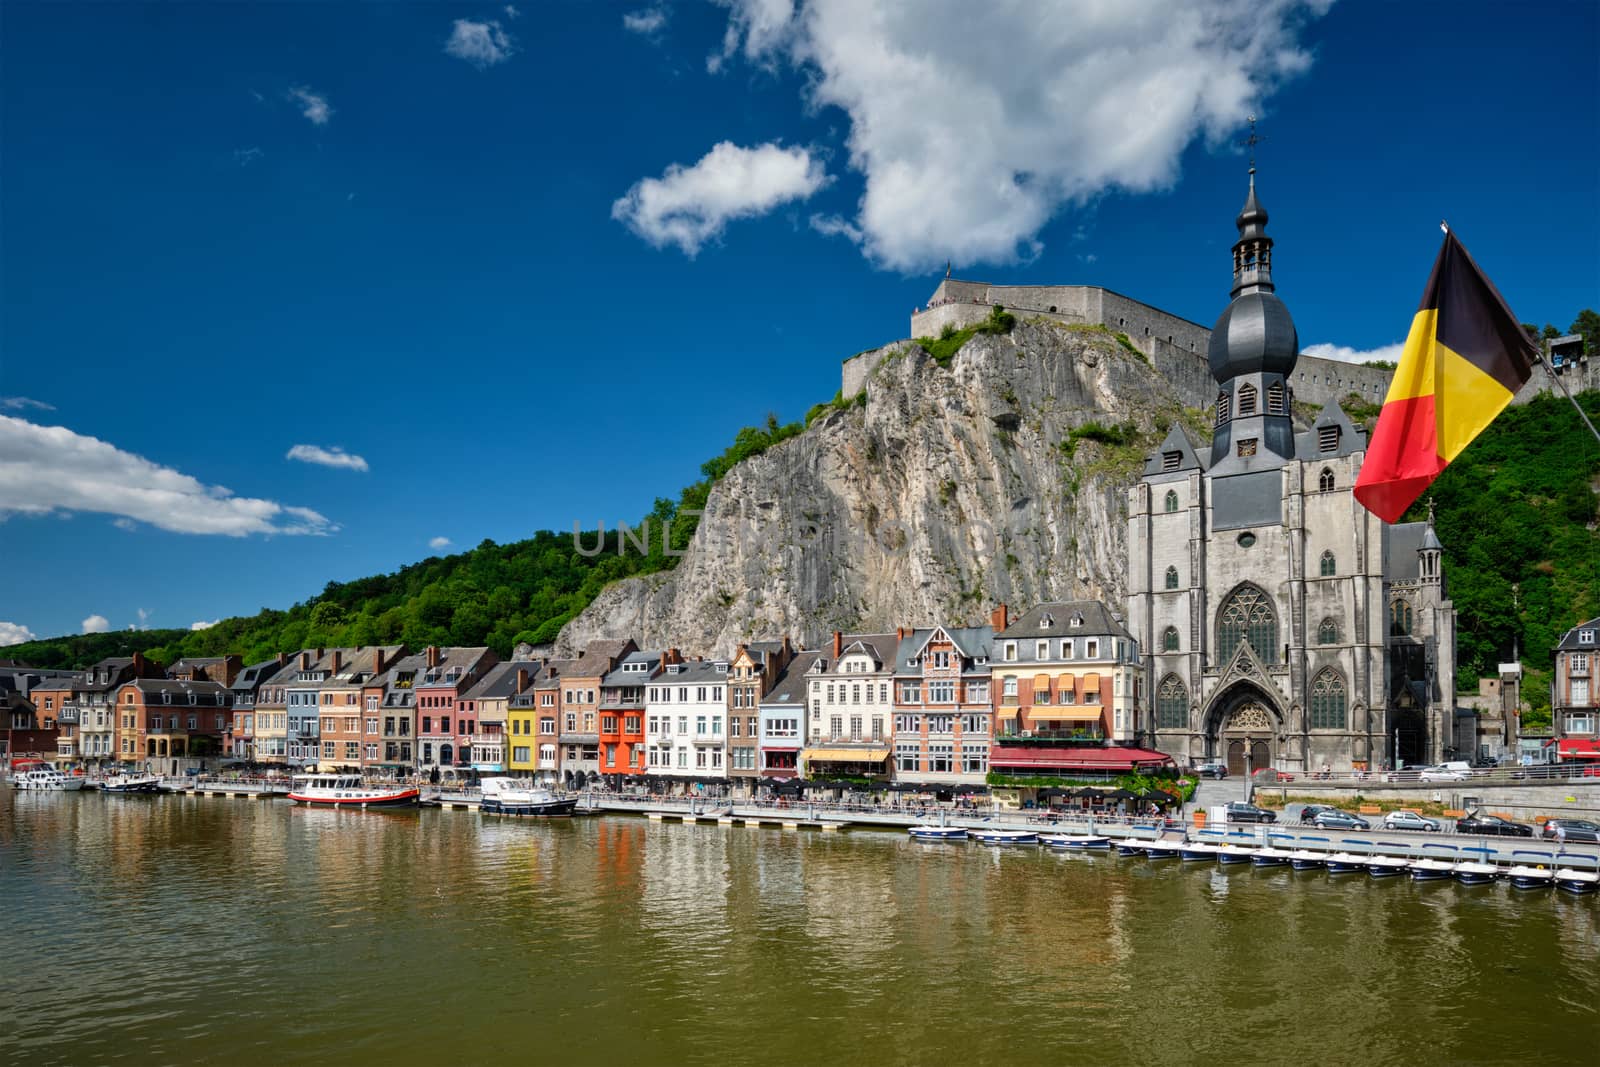 View of picturesque Dinant town, Dinant Citadel and Collegiate Church of Notre Dame de Dinant over the Meuse river with belgium flag. Belgian province of Namur, Blegium